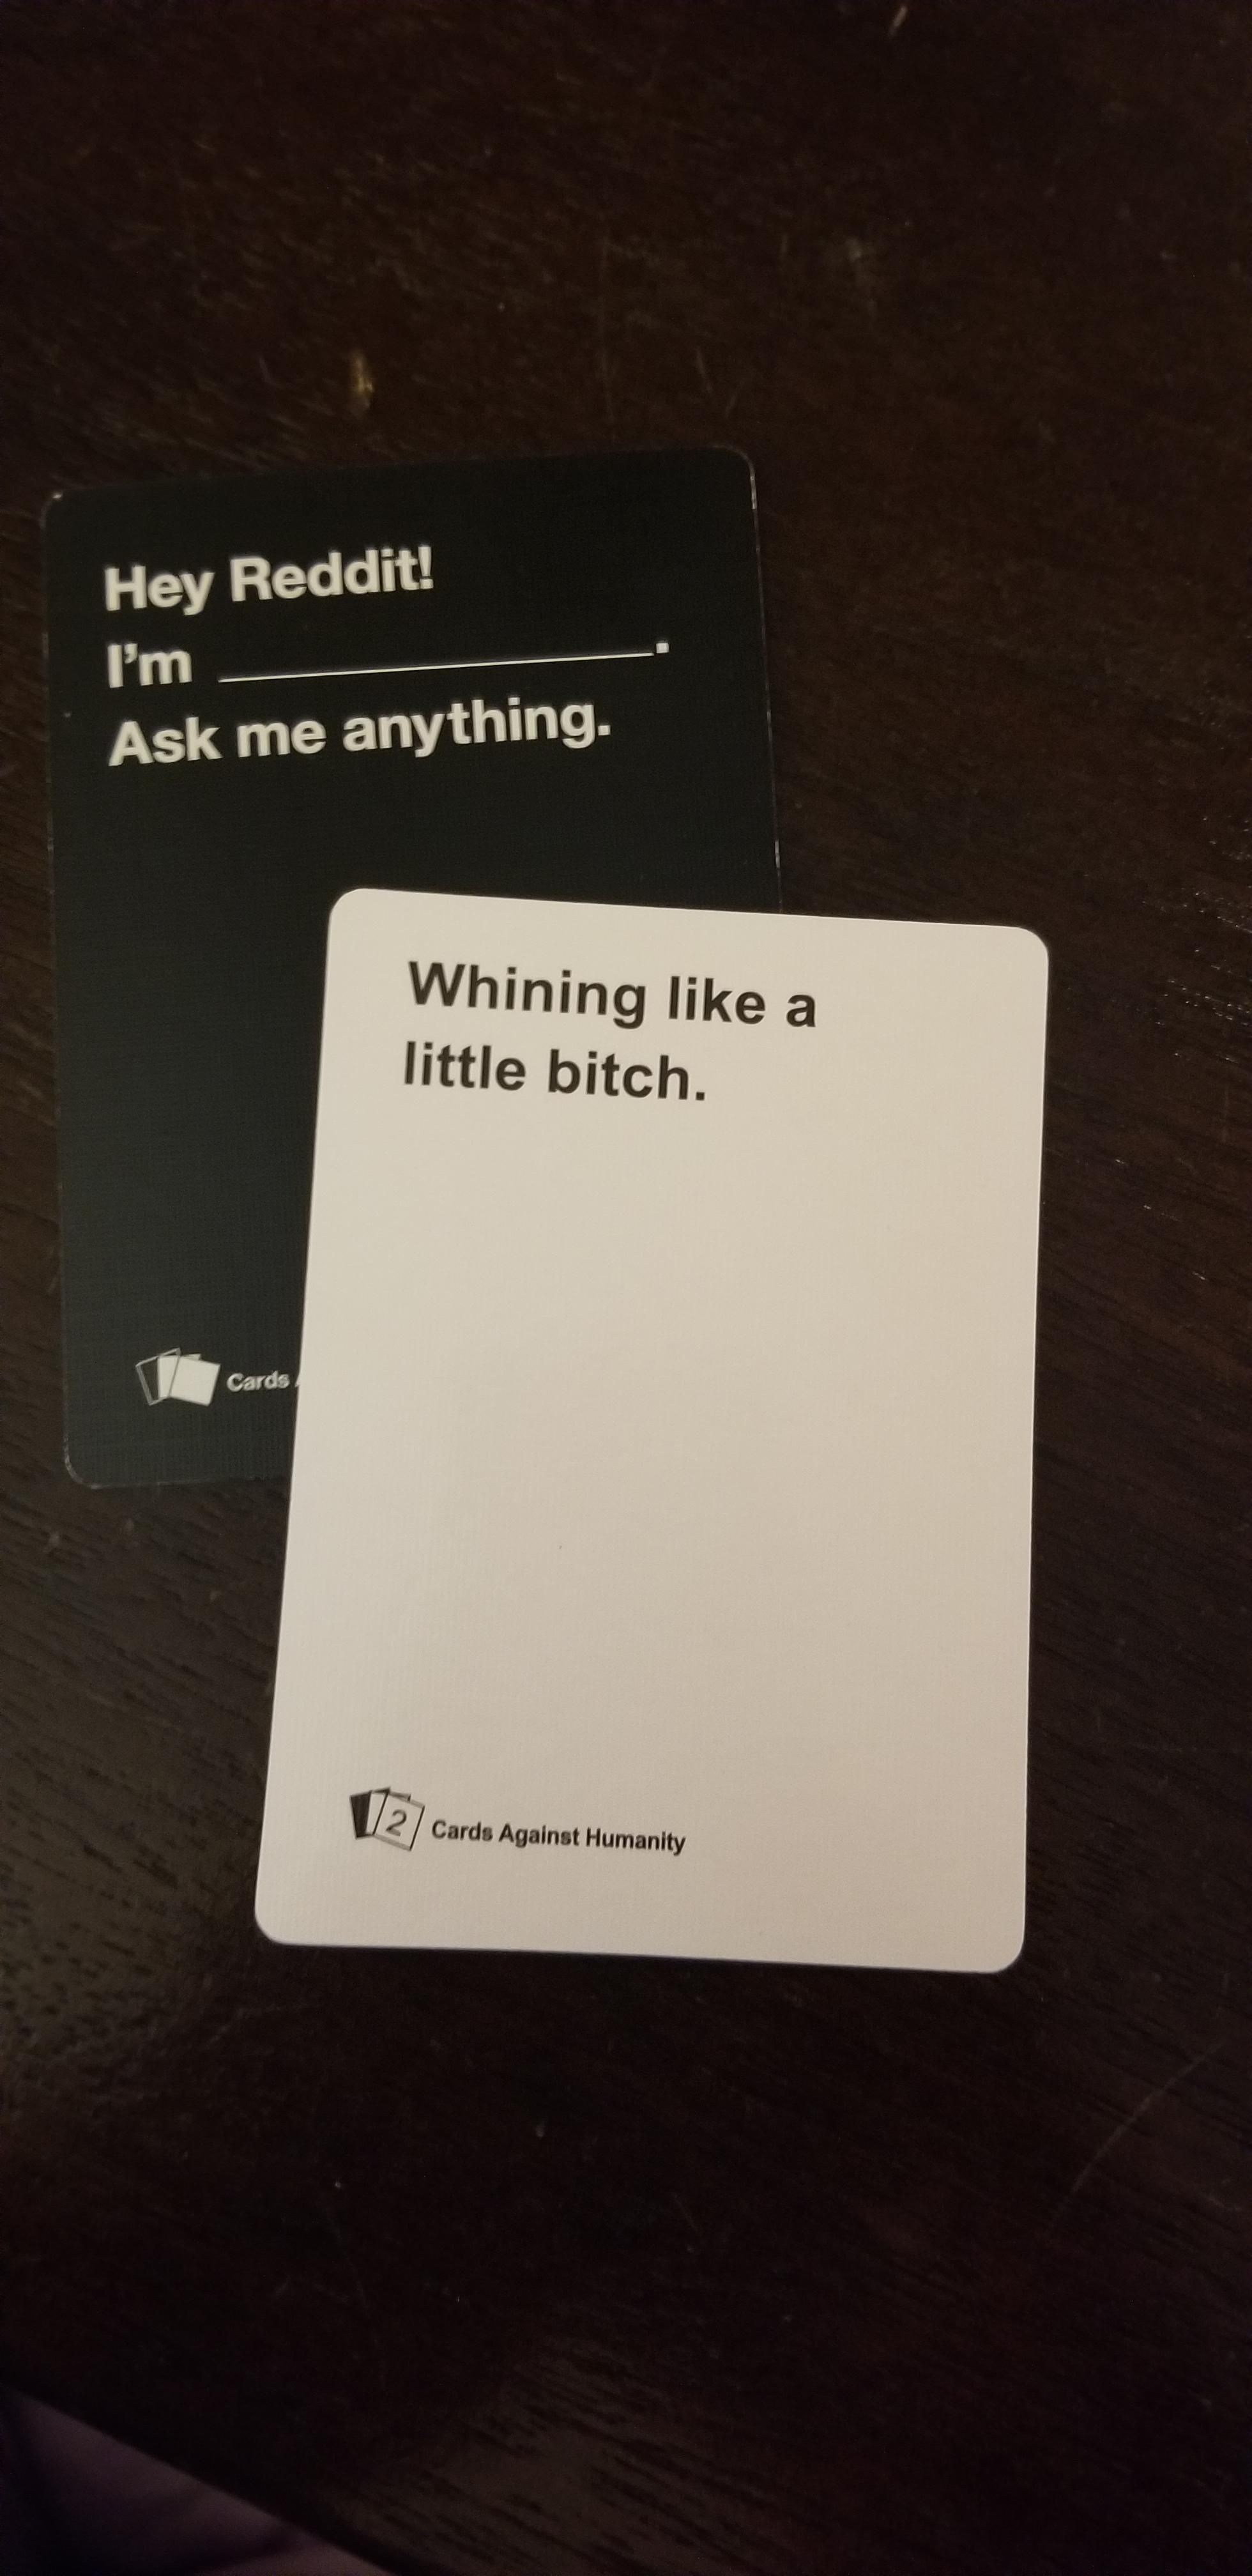 This pairing came up during cards against humanity.